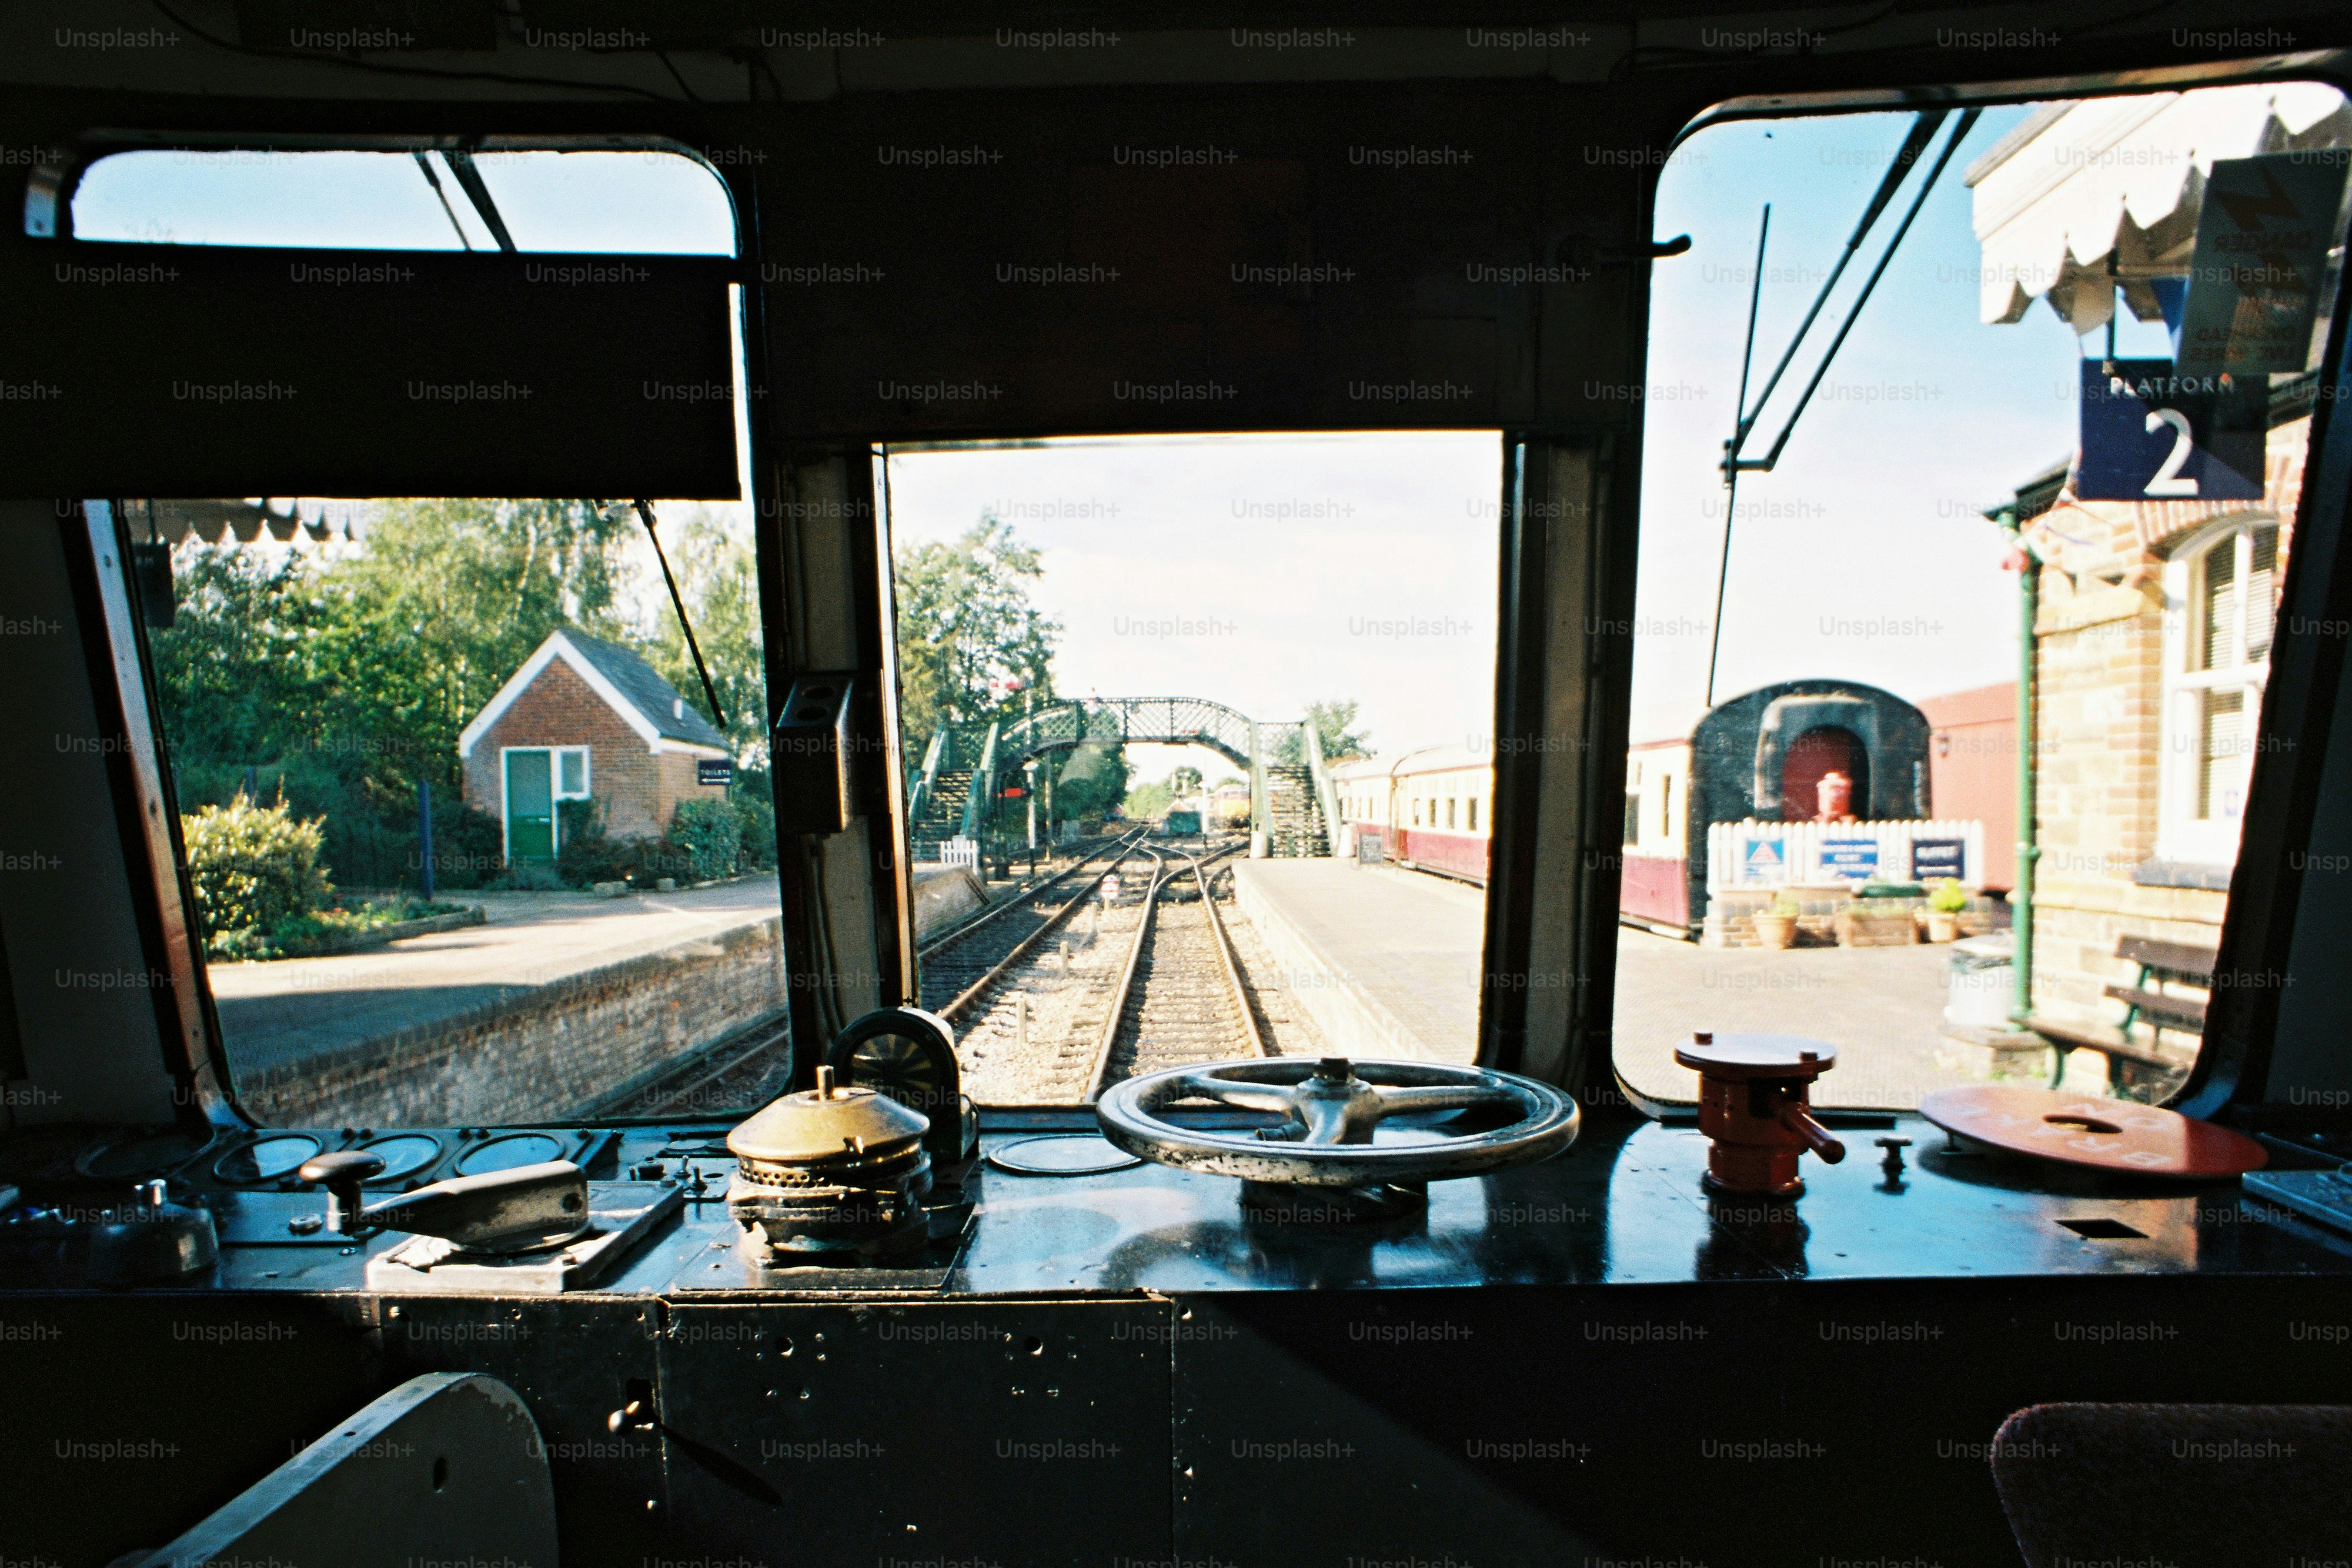 A train driver’s view of a vintage train pulling up to a station platform. Shot on film.